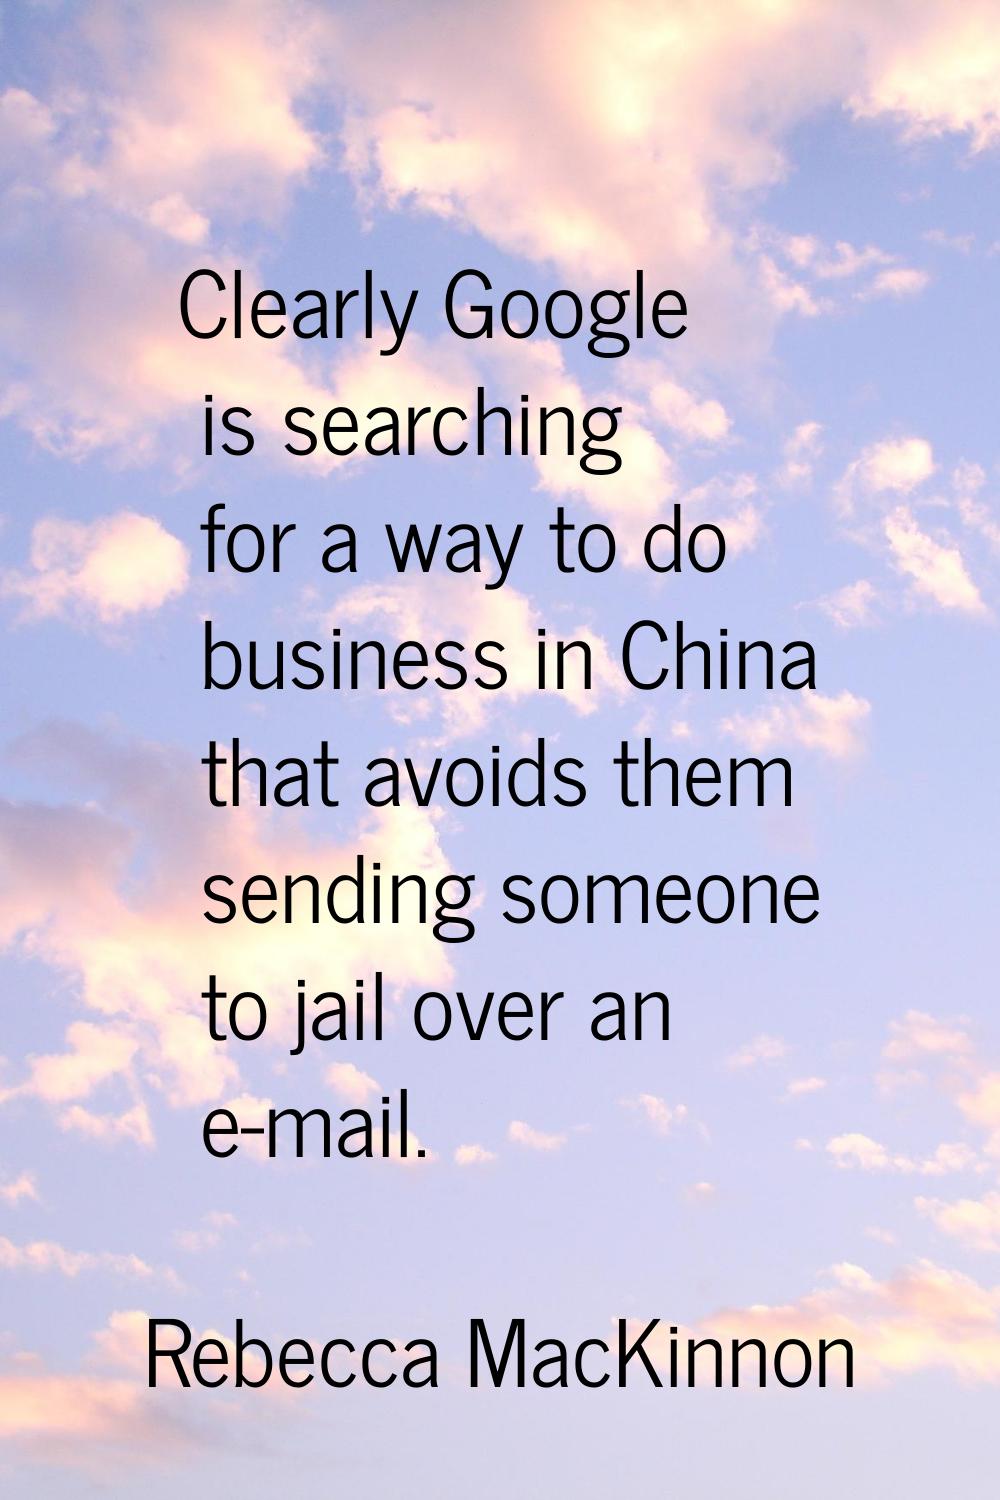 Clearly Google is searching for a way to do business in China that avoids them sending someone to j